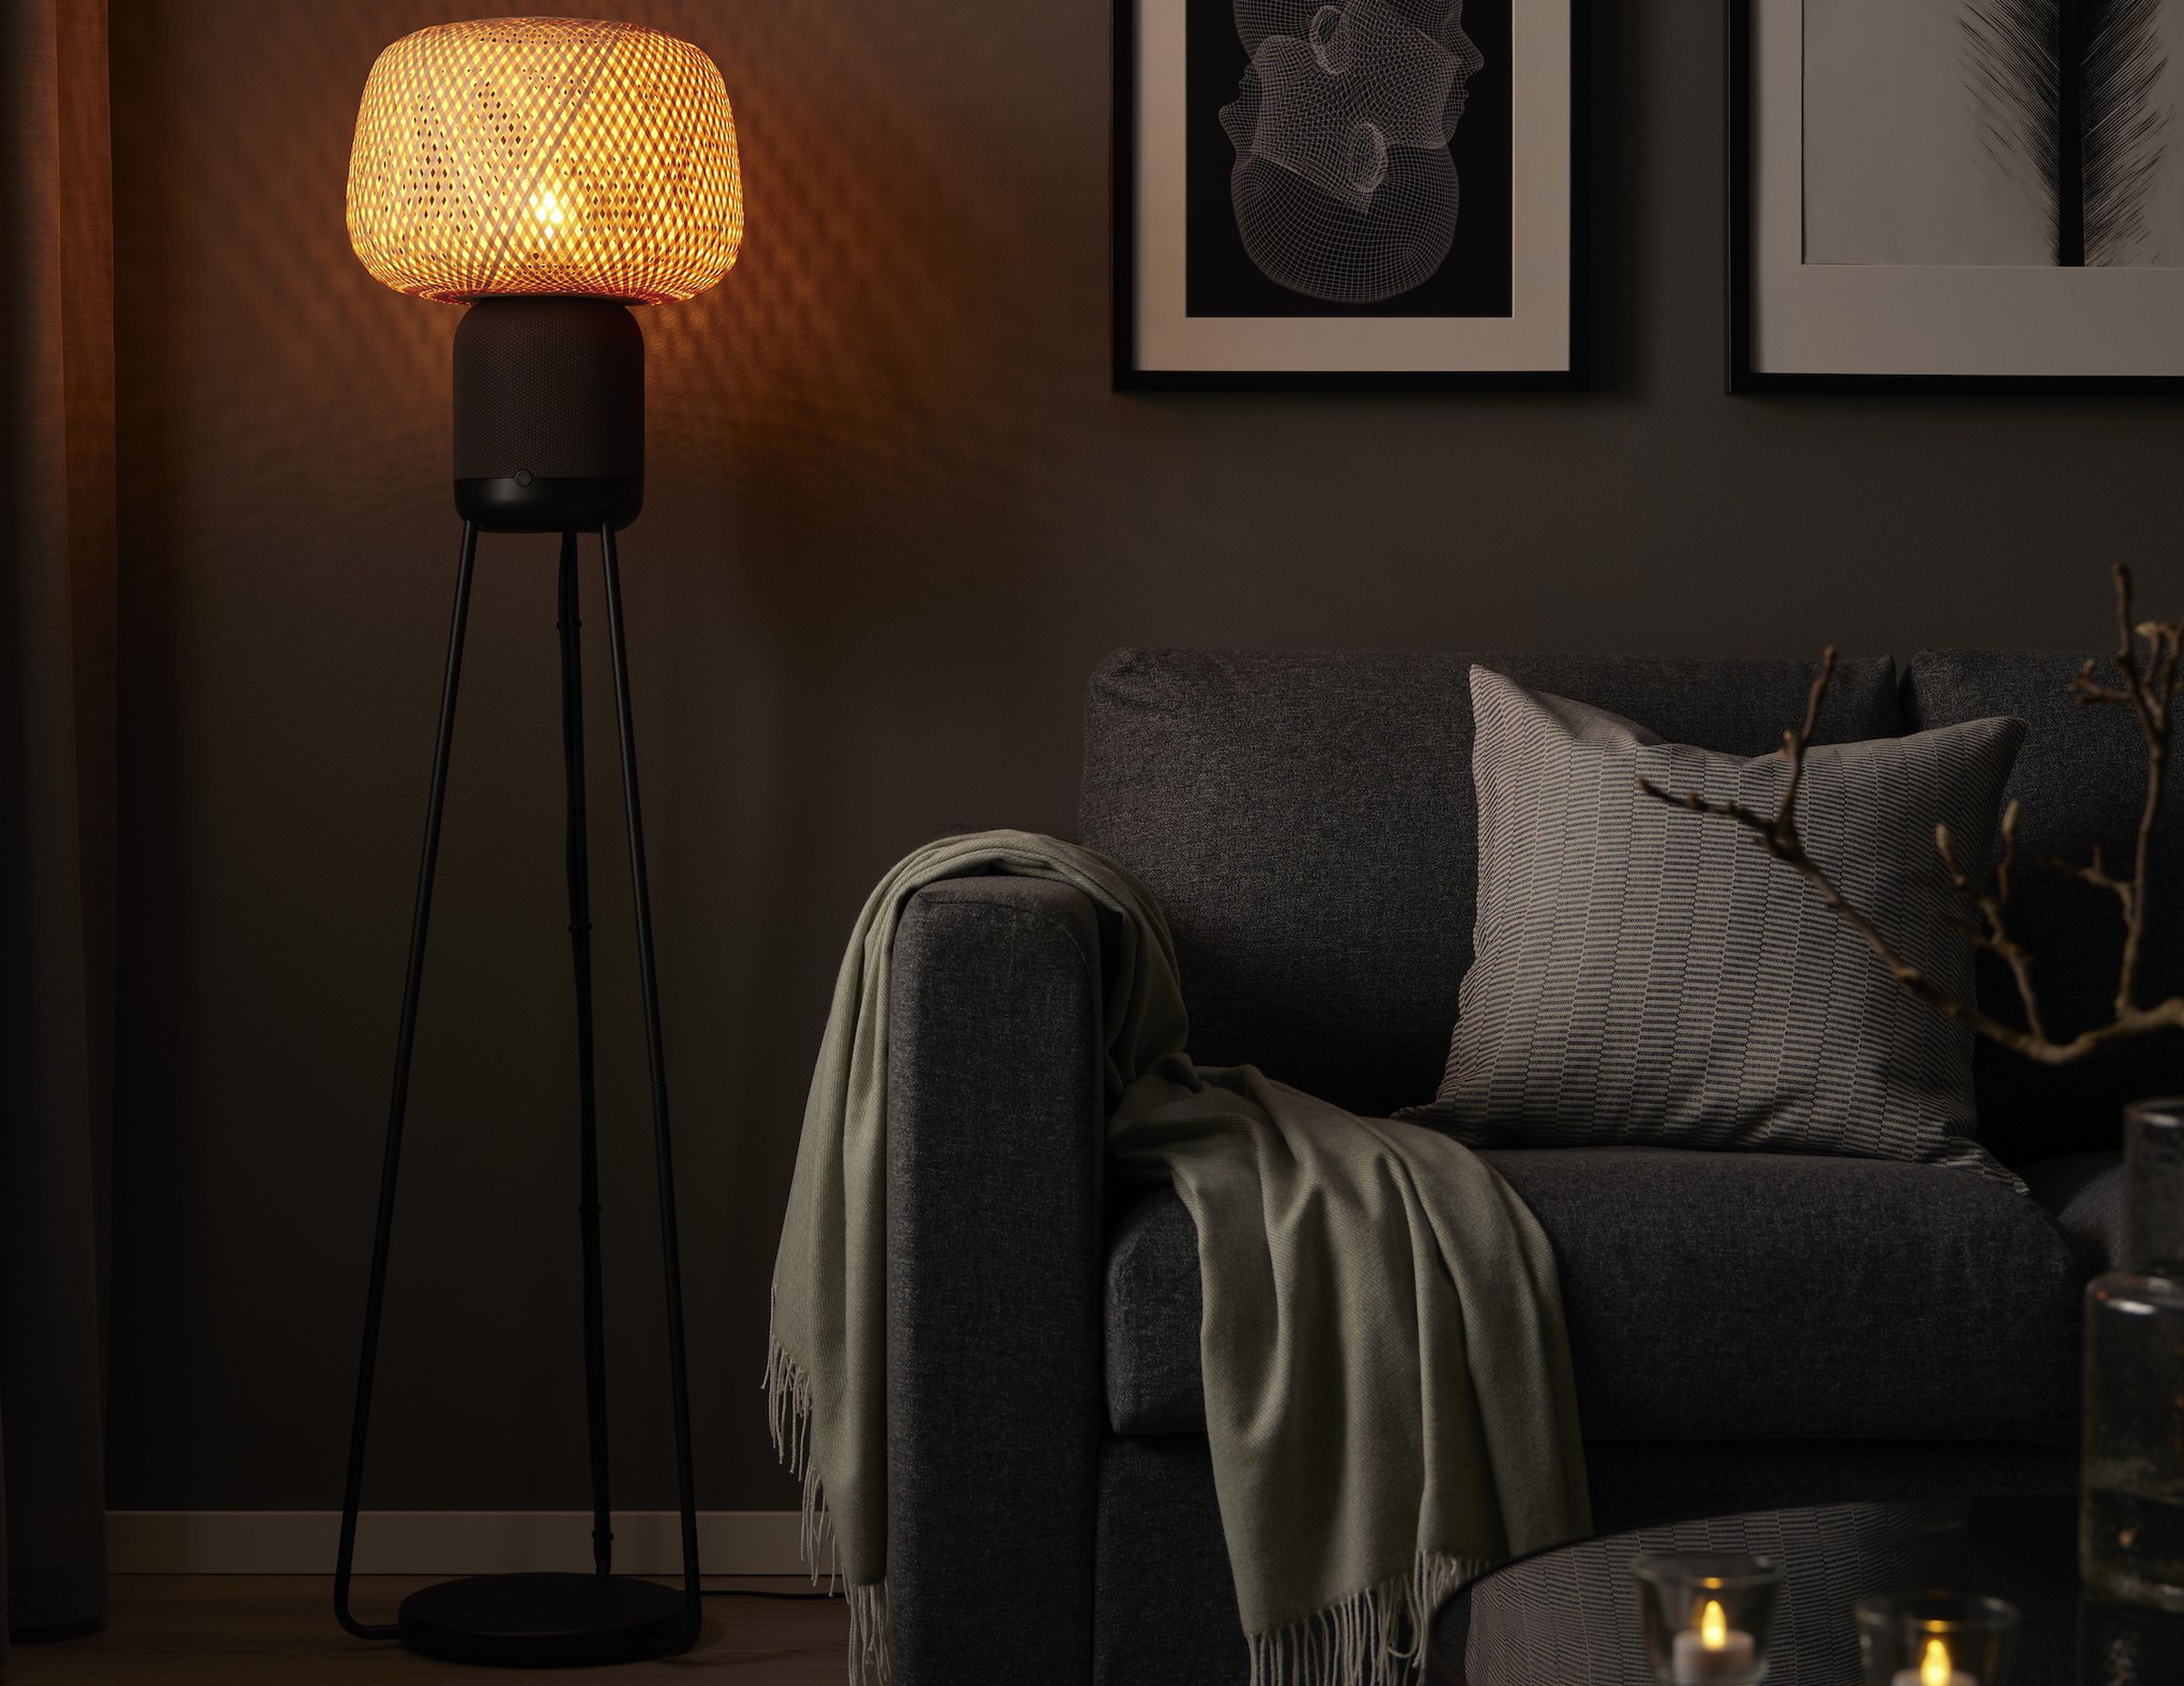 An image of the Symfonisk floor lamp enclosure illuminated in a darkened room.